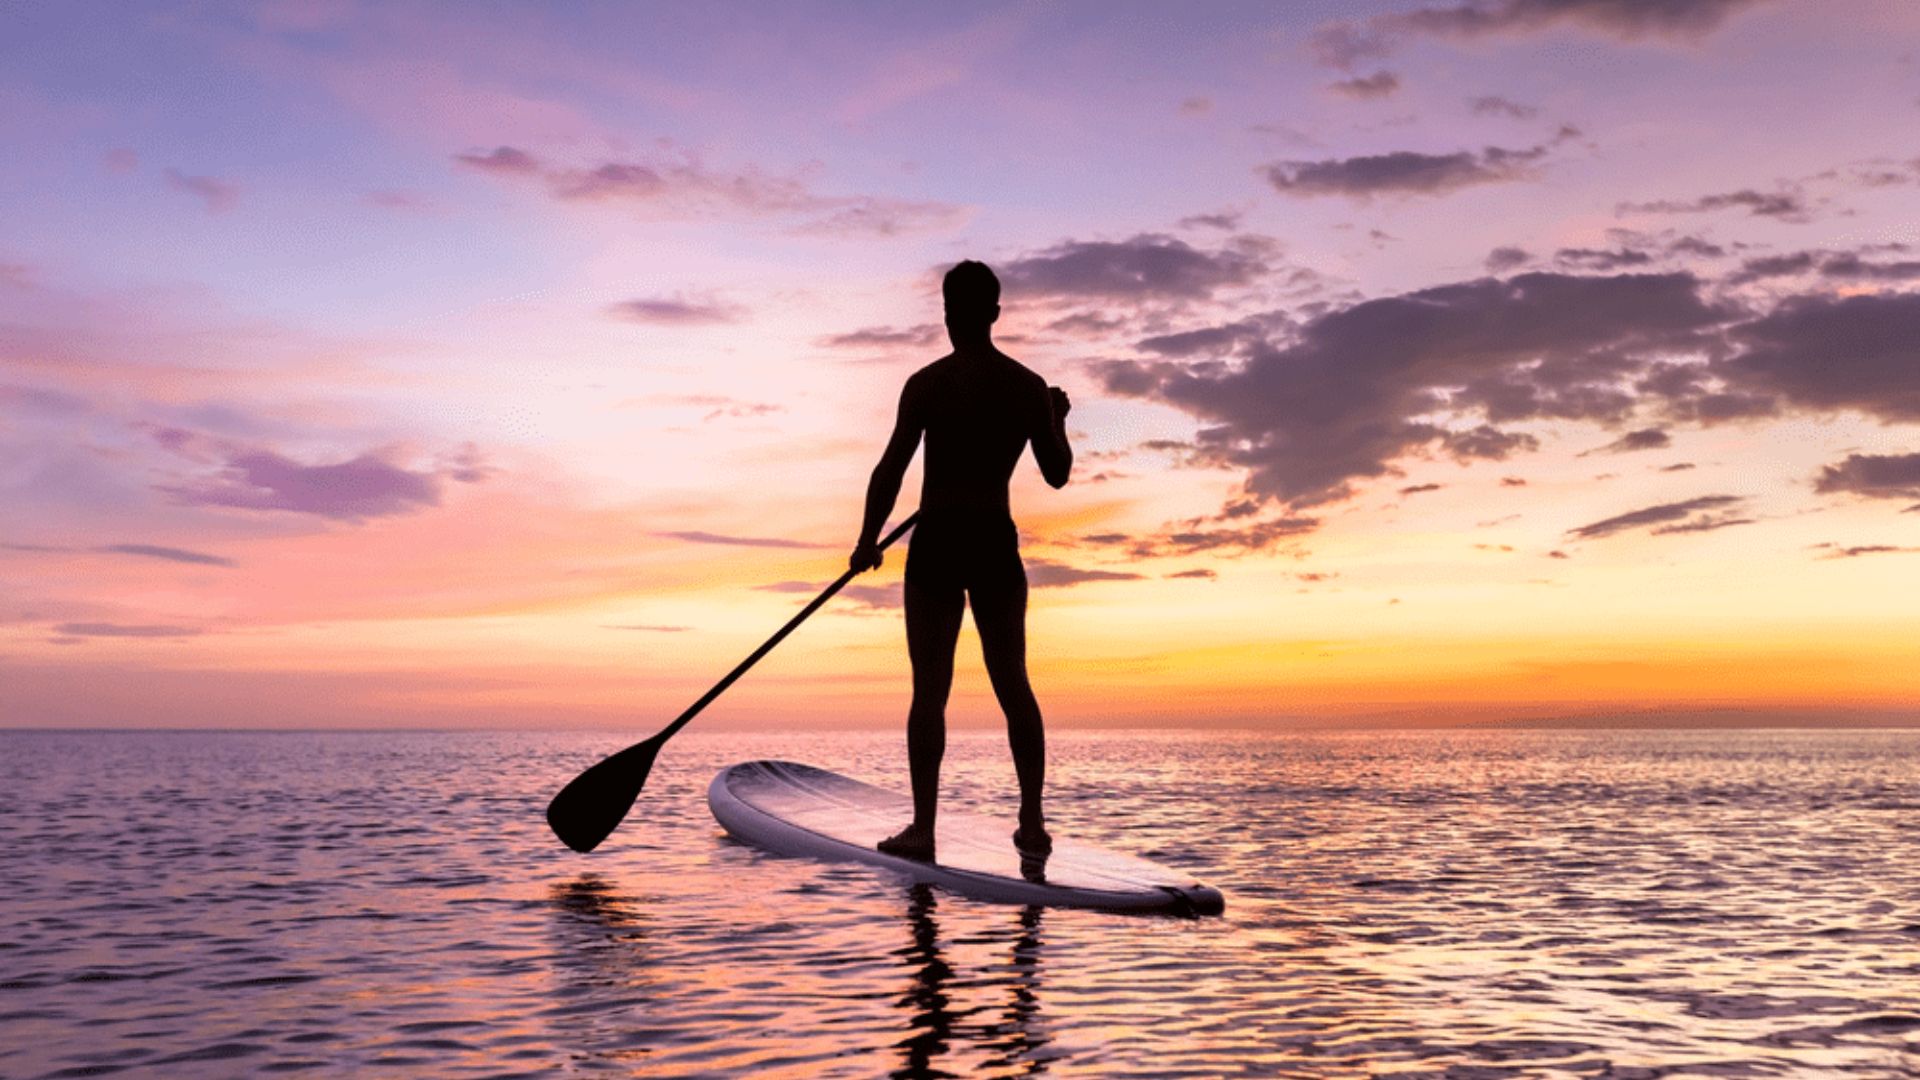 Paddle sup or paddle surf. What is the difference?